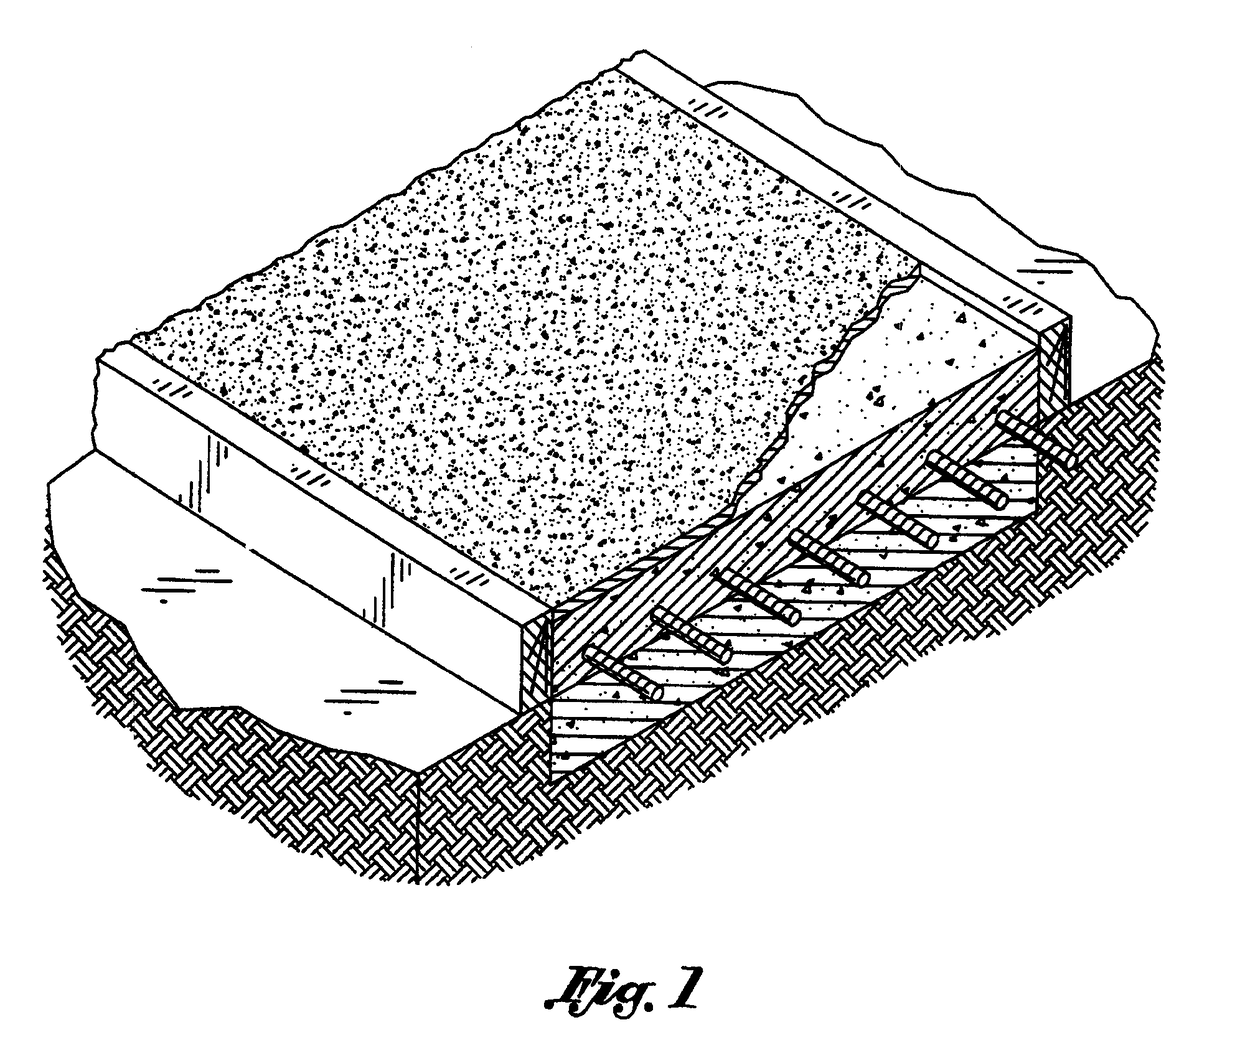 Architectural concrete and method of forming the same